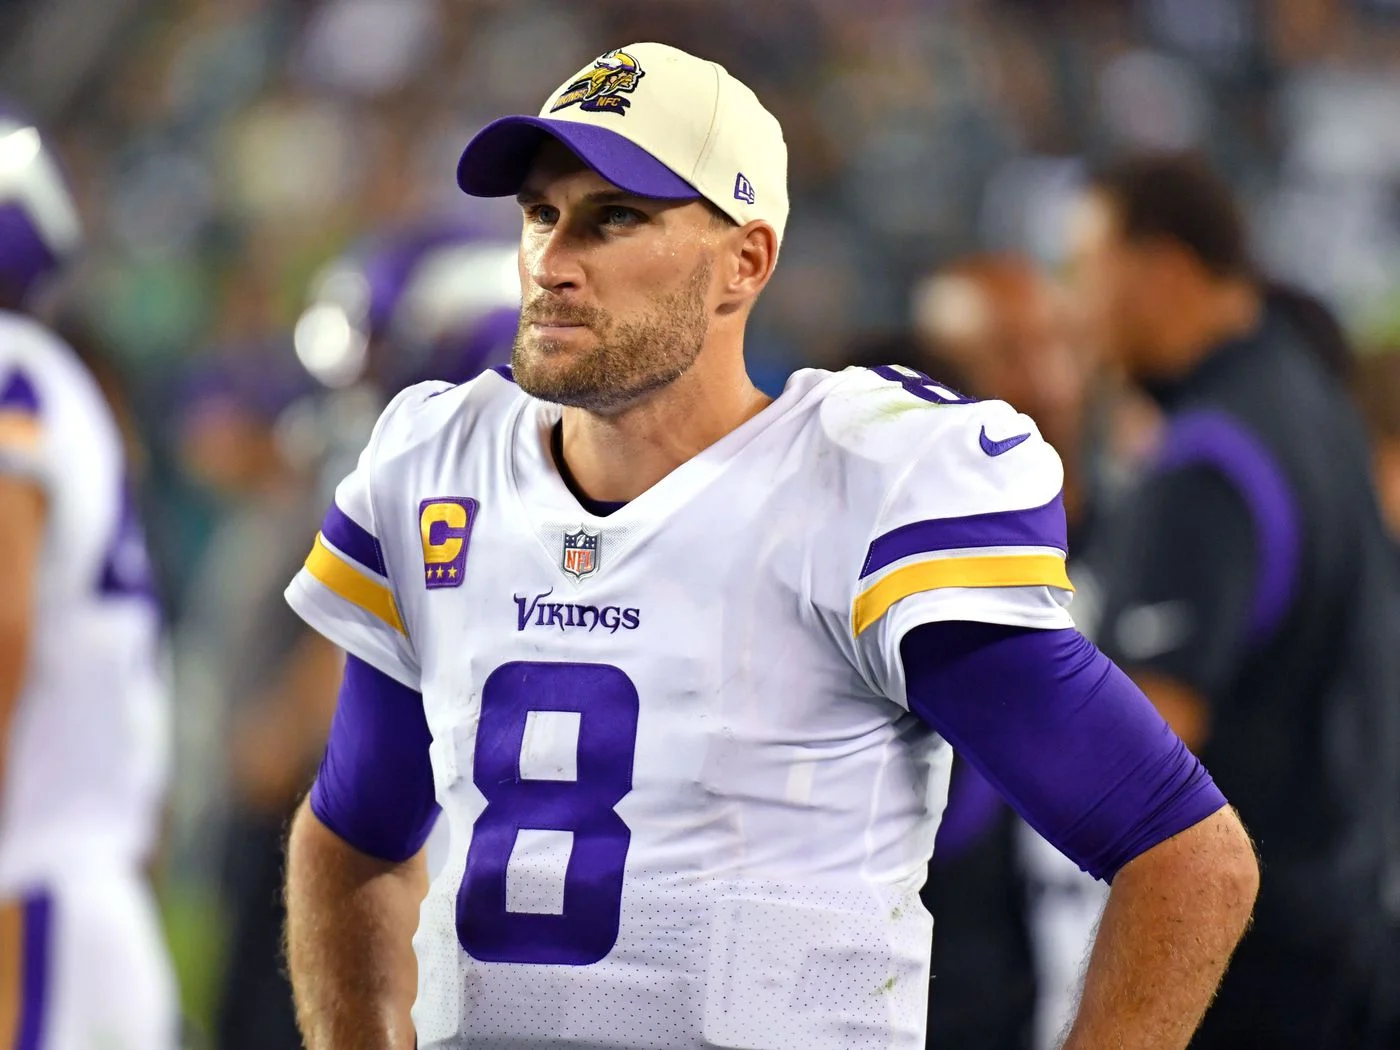 Kirk Cousins currently plays for Minnesota Vikings